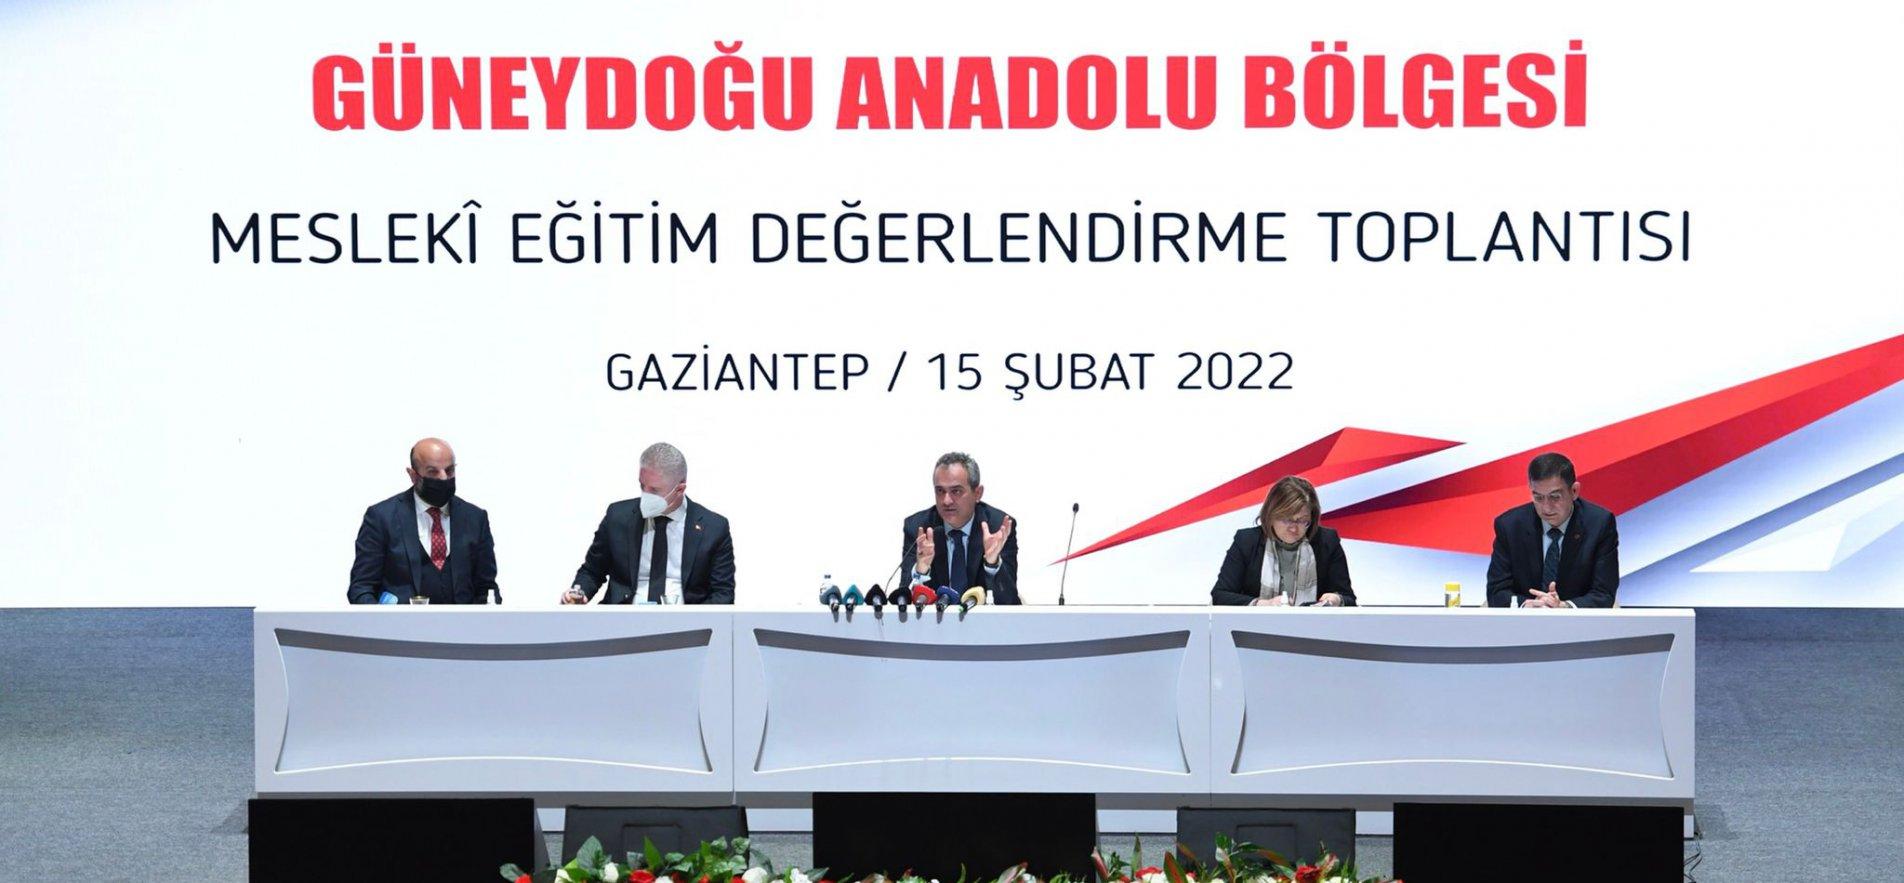 FIRST OF REGIONAL VOCATIONAL EDUCATION ASSESSMENT MEETINGS HELD IN GAZİANTEP